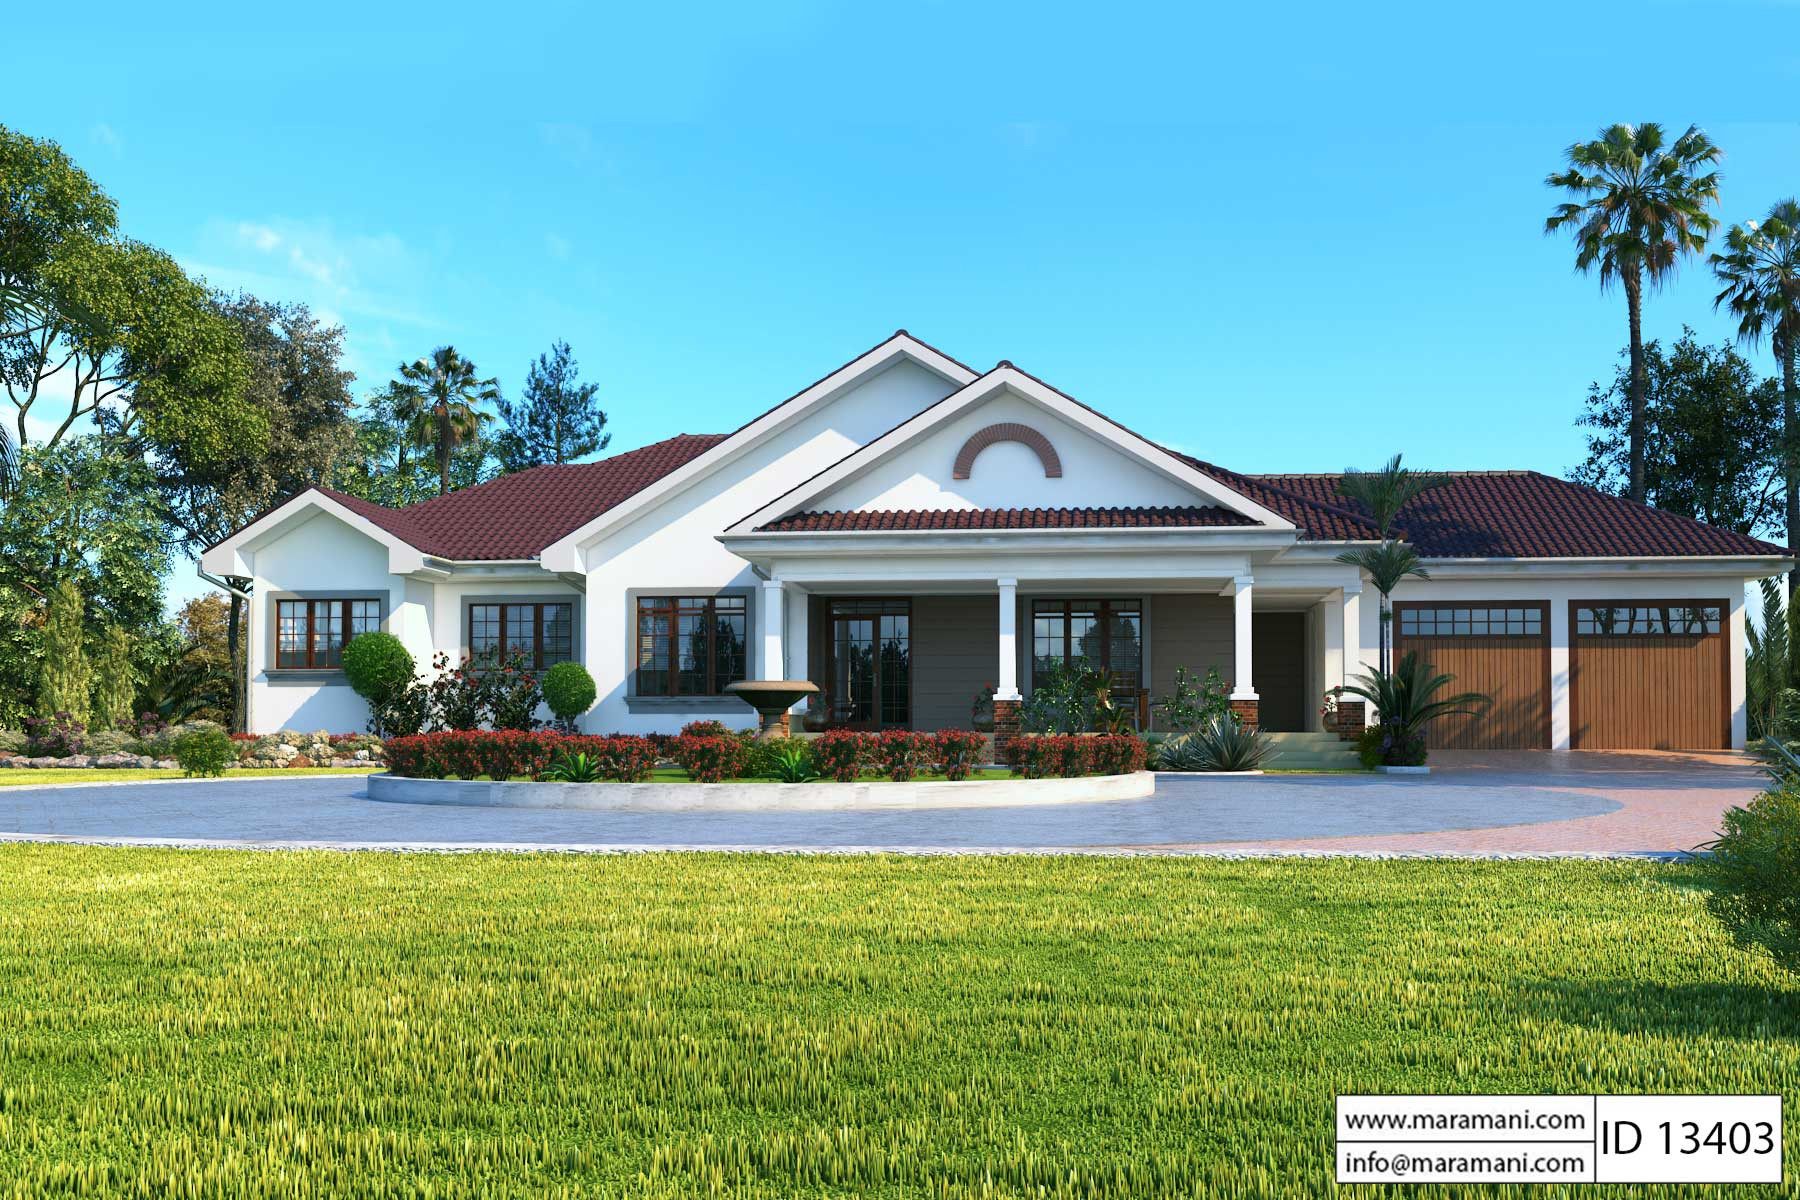 3 Bedroom bungalow with garage ID 13403 House Plans by